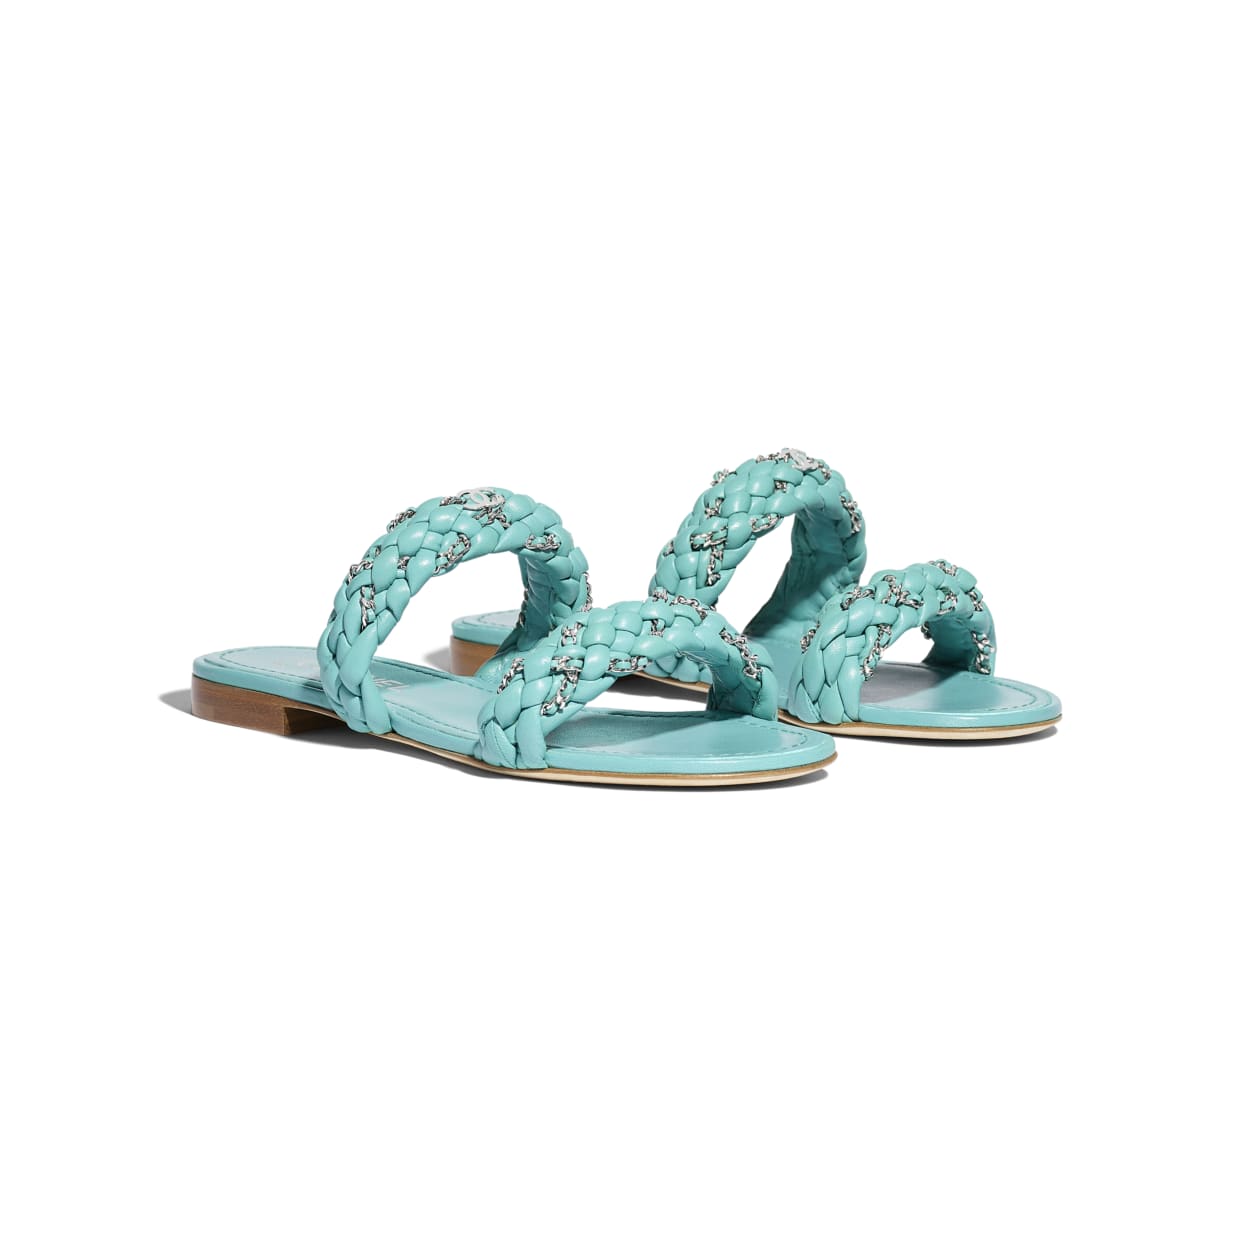 Chanel Sandals From Spring/Summer 2019 Act 2 Collection - Spotted Fashion